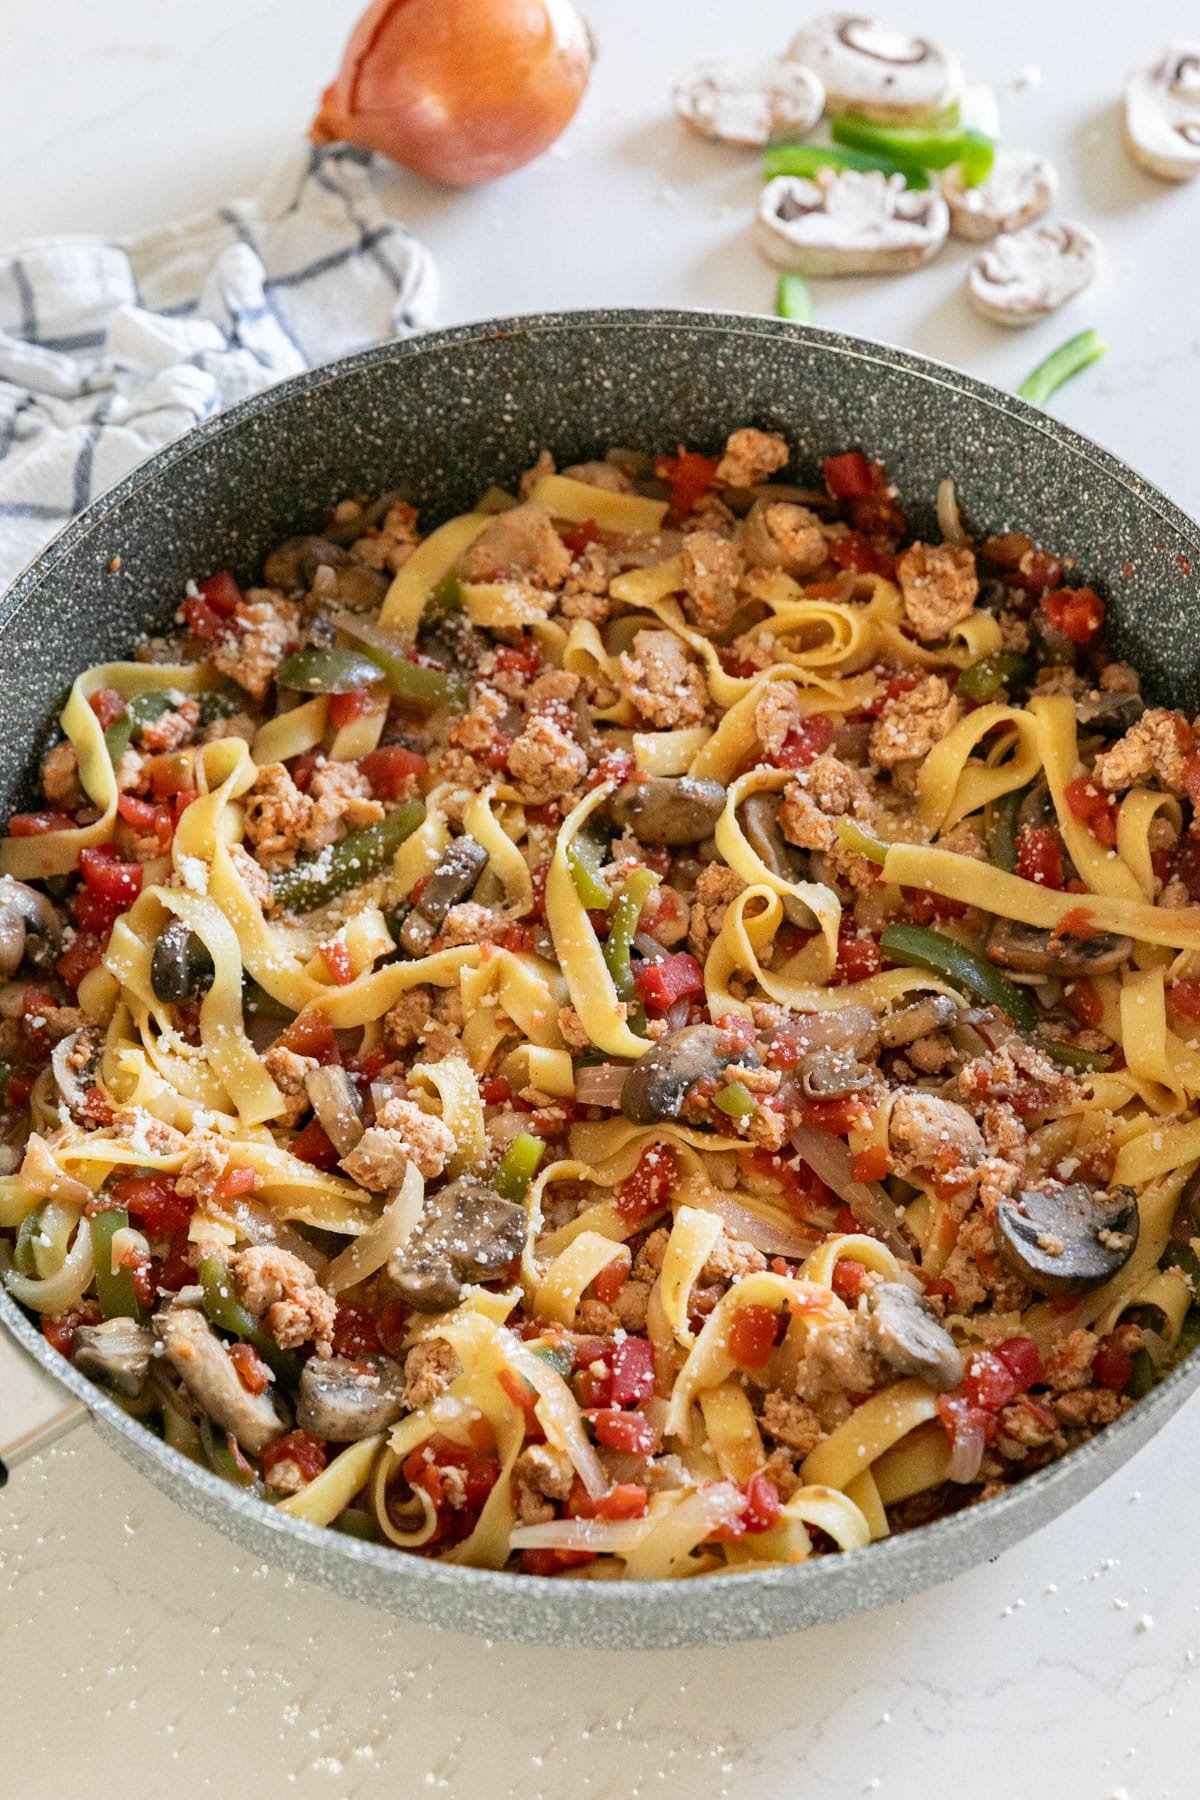 A pan of peppers onions and sausage pasta with veggies and a napkin behind it.